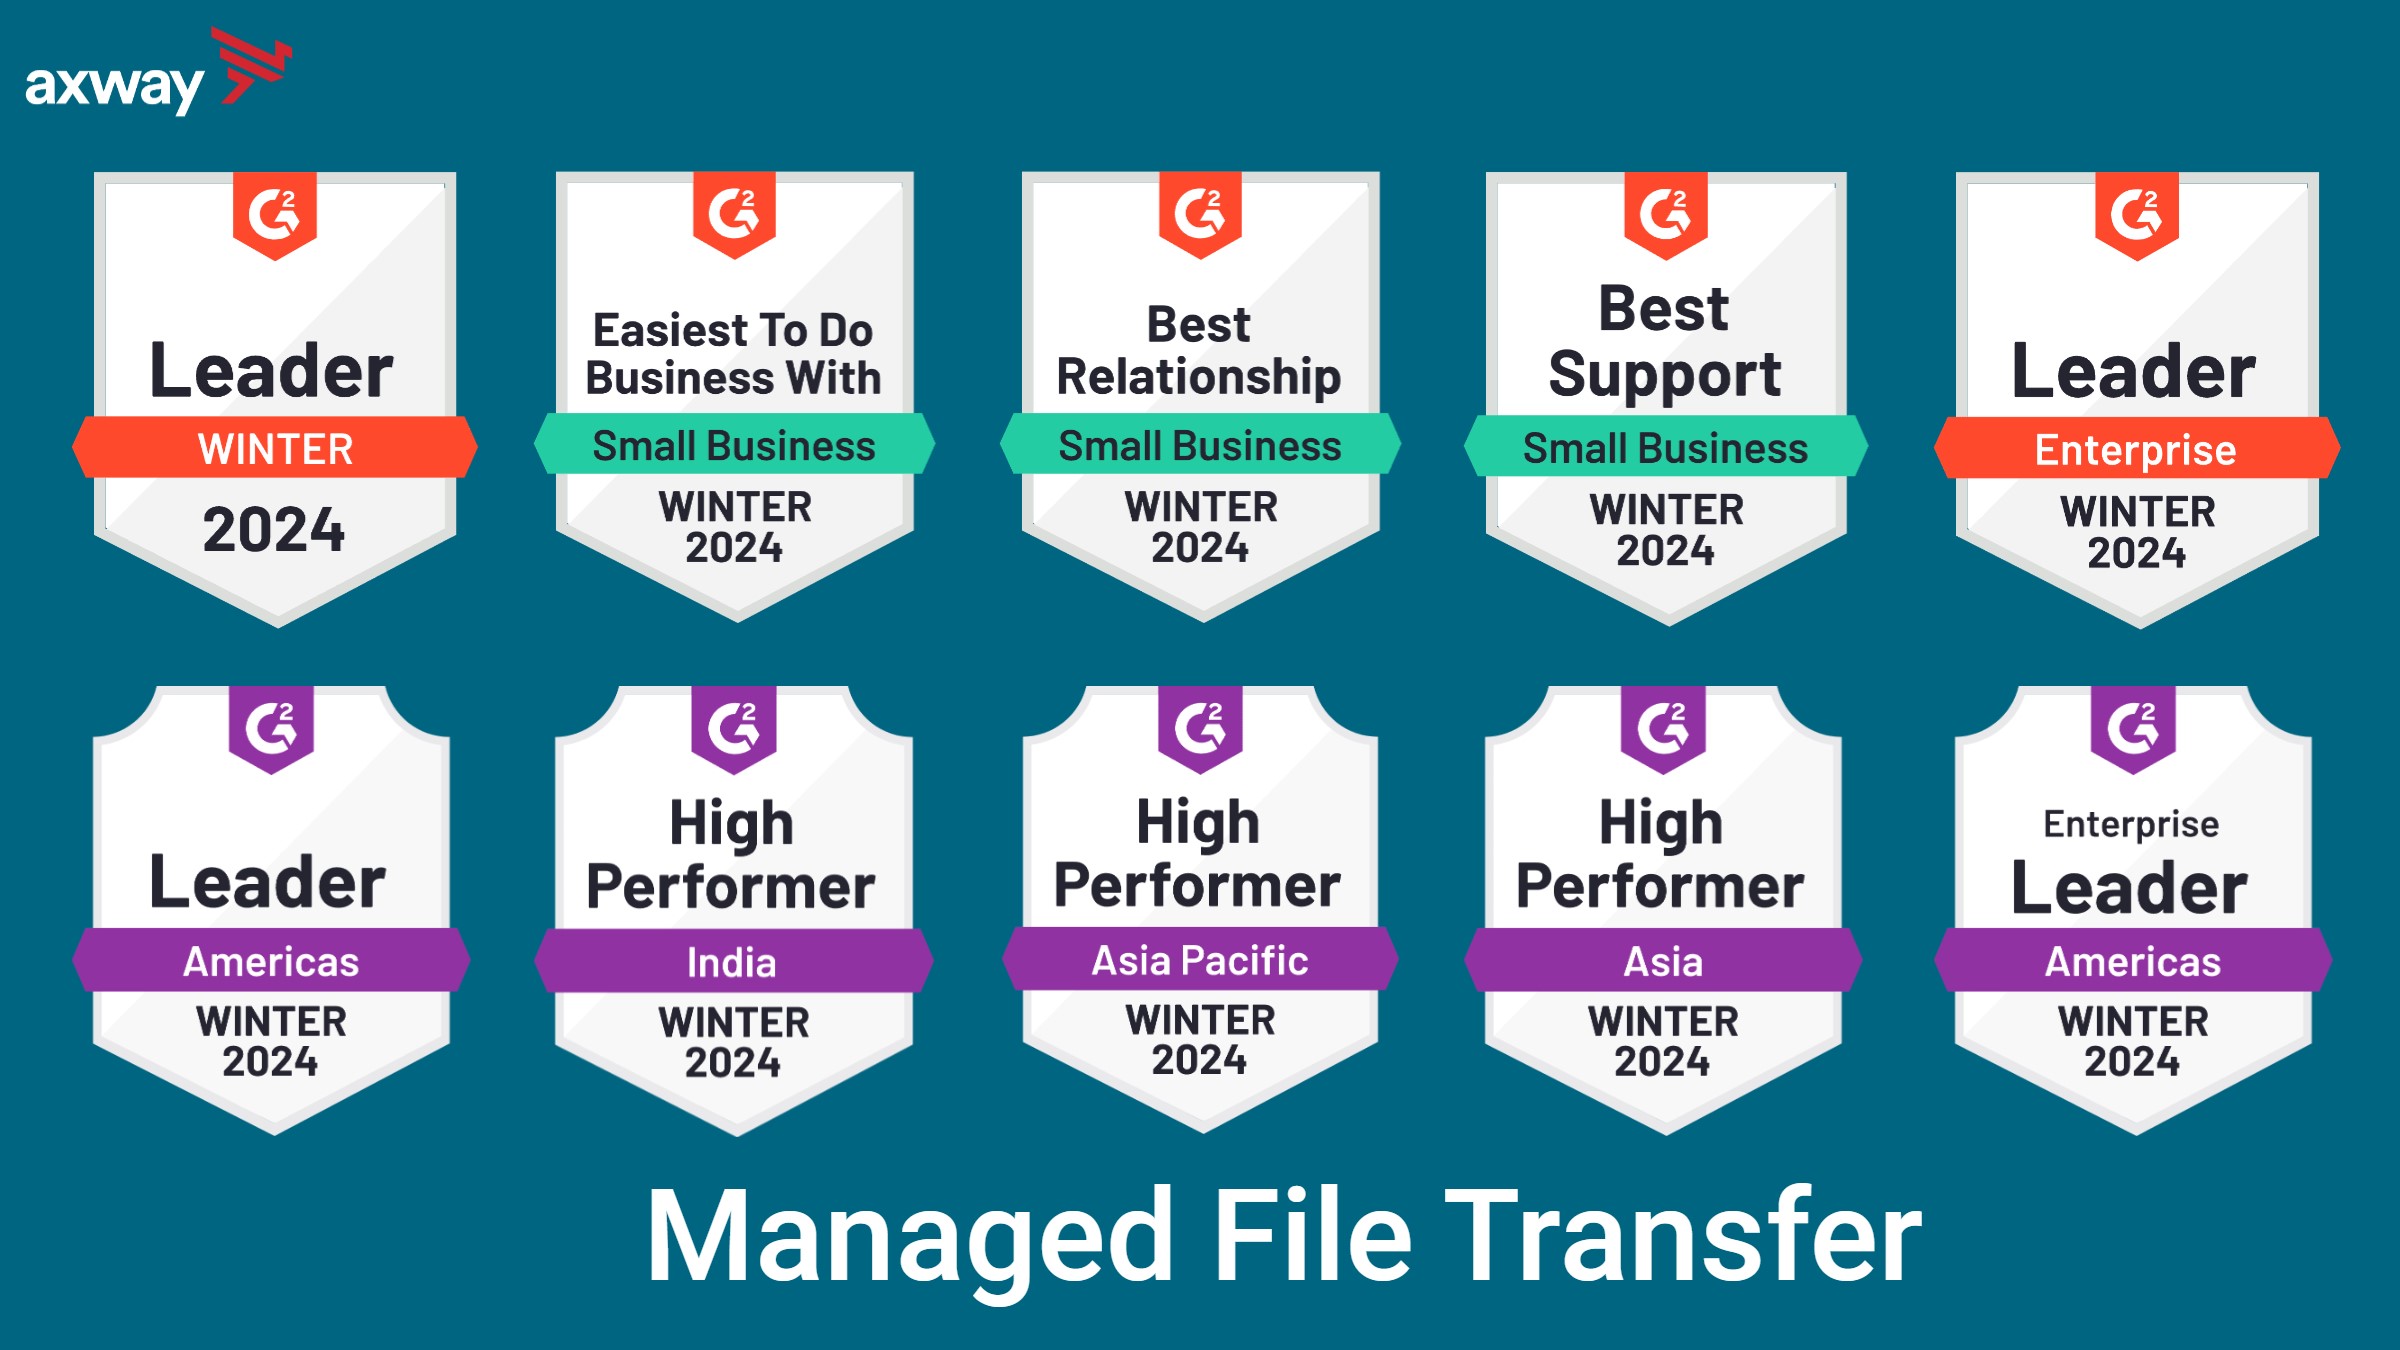 G2 Customer Reviews Winter 2024 Reports Axway Managed File Transfer (MFT)